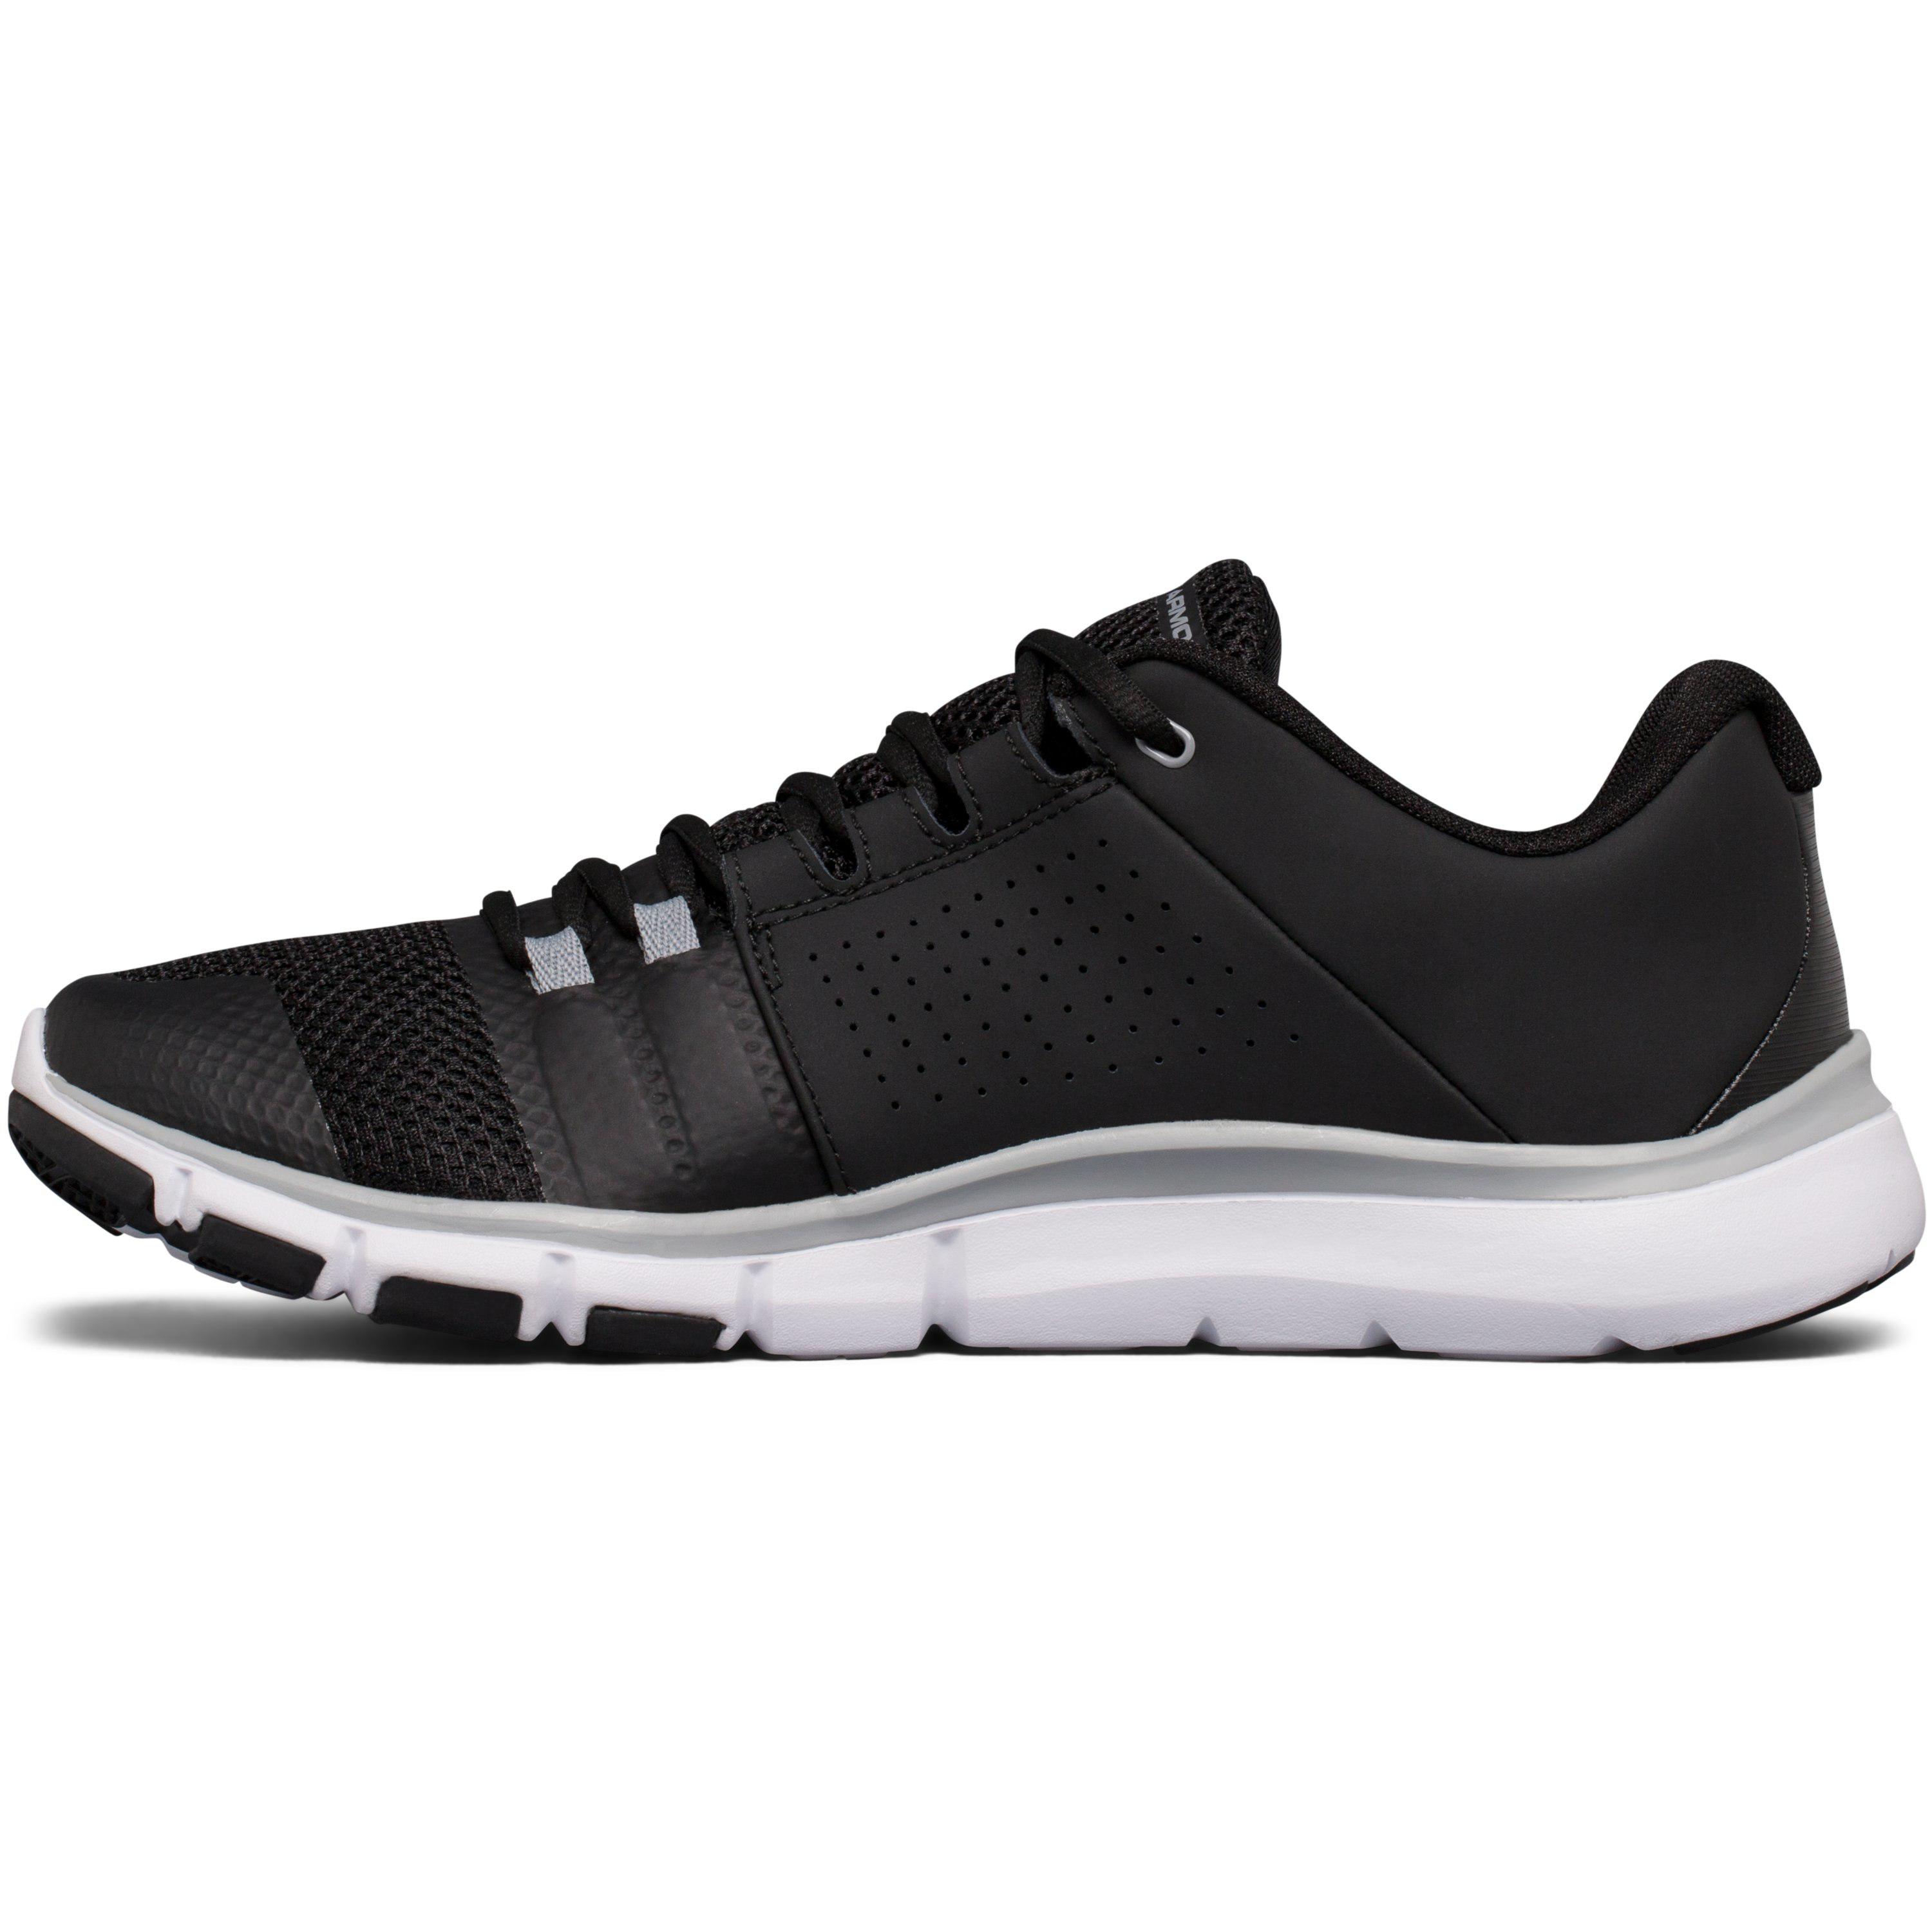 Under Armour Leather Men's Ua Strive 7 – Wide (2e) Training Shoes in ...